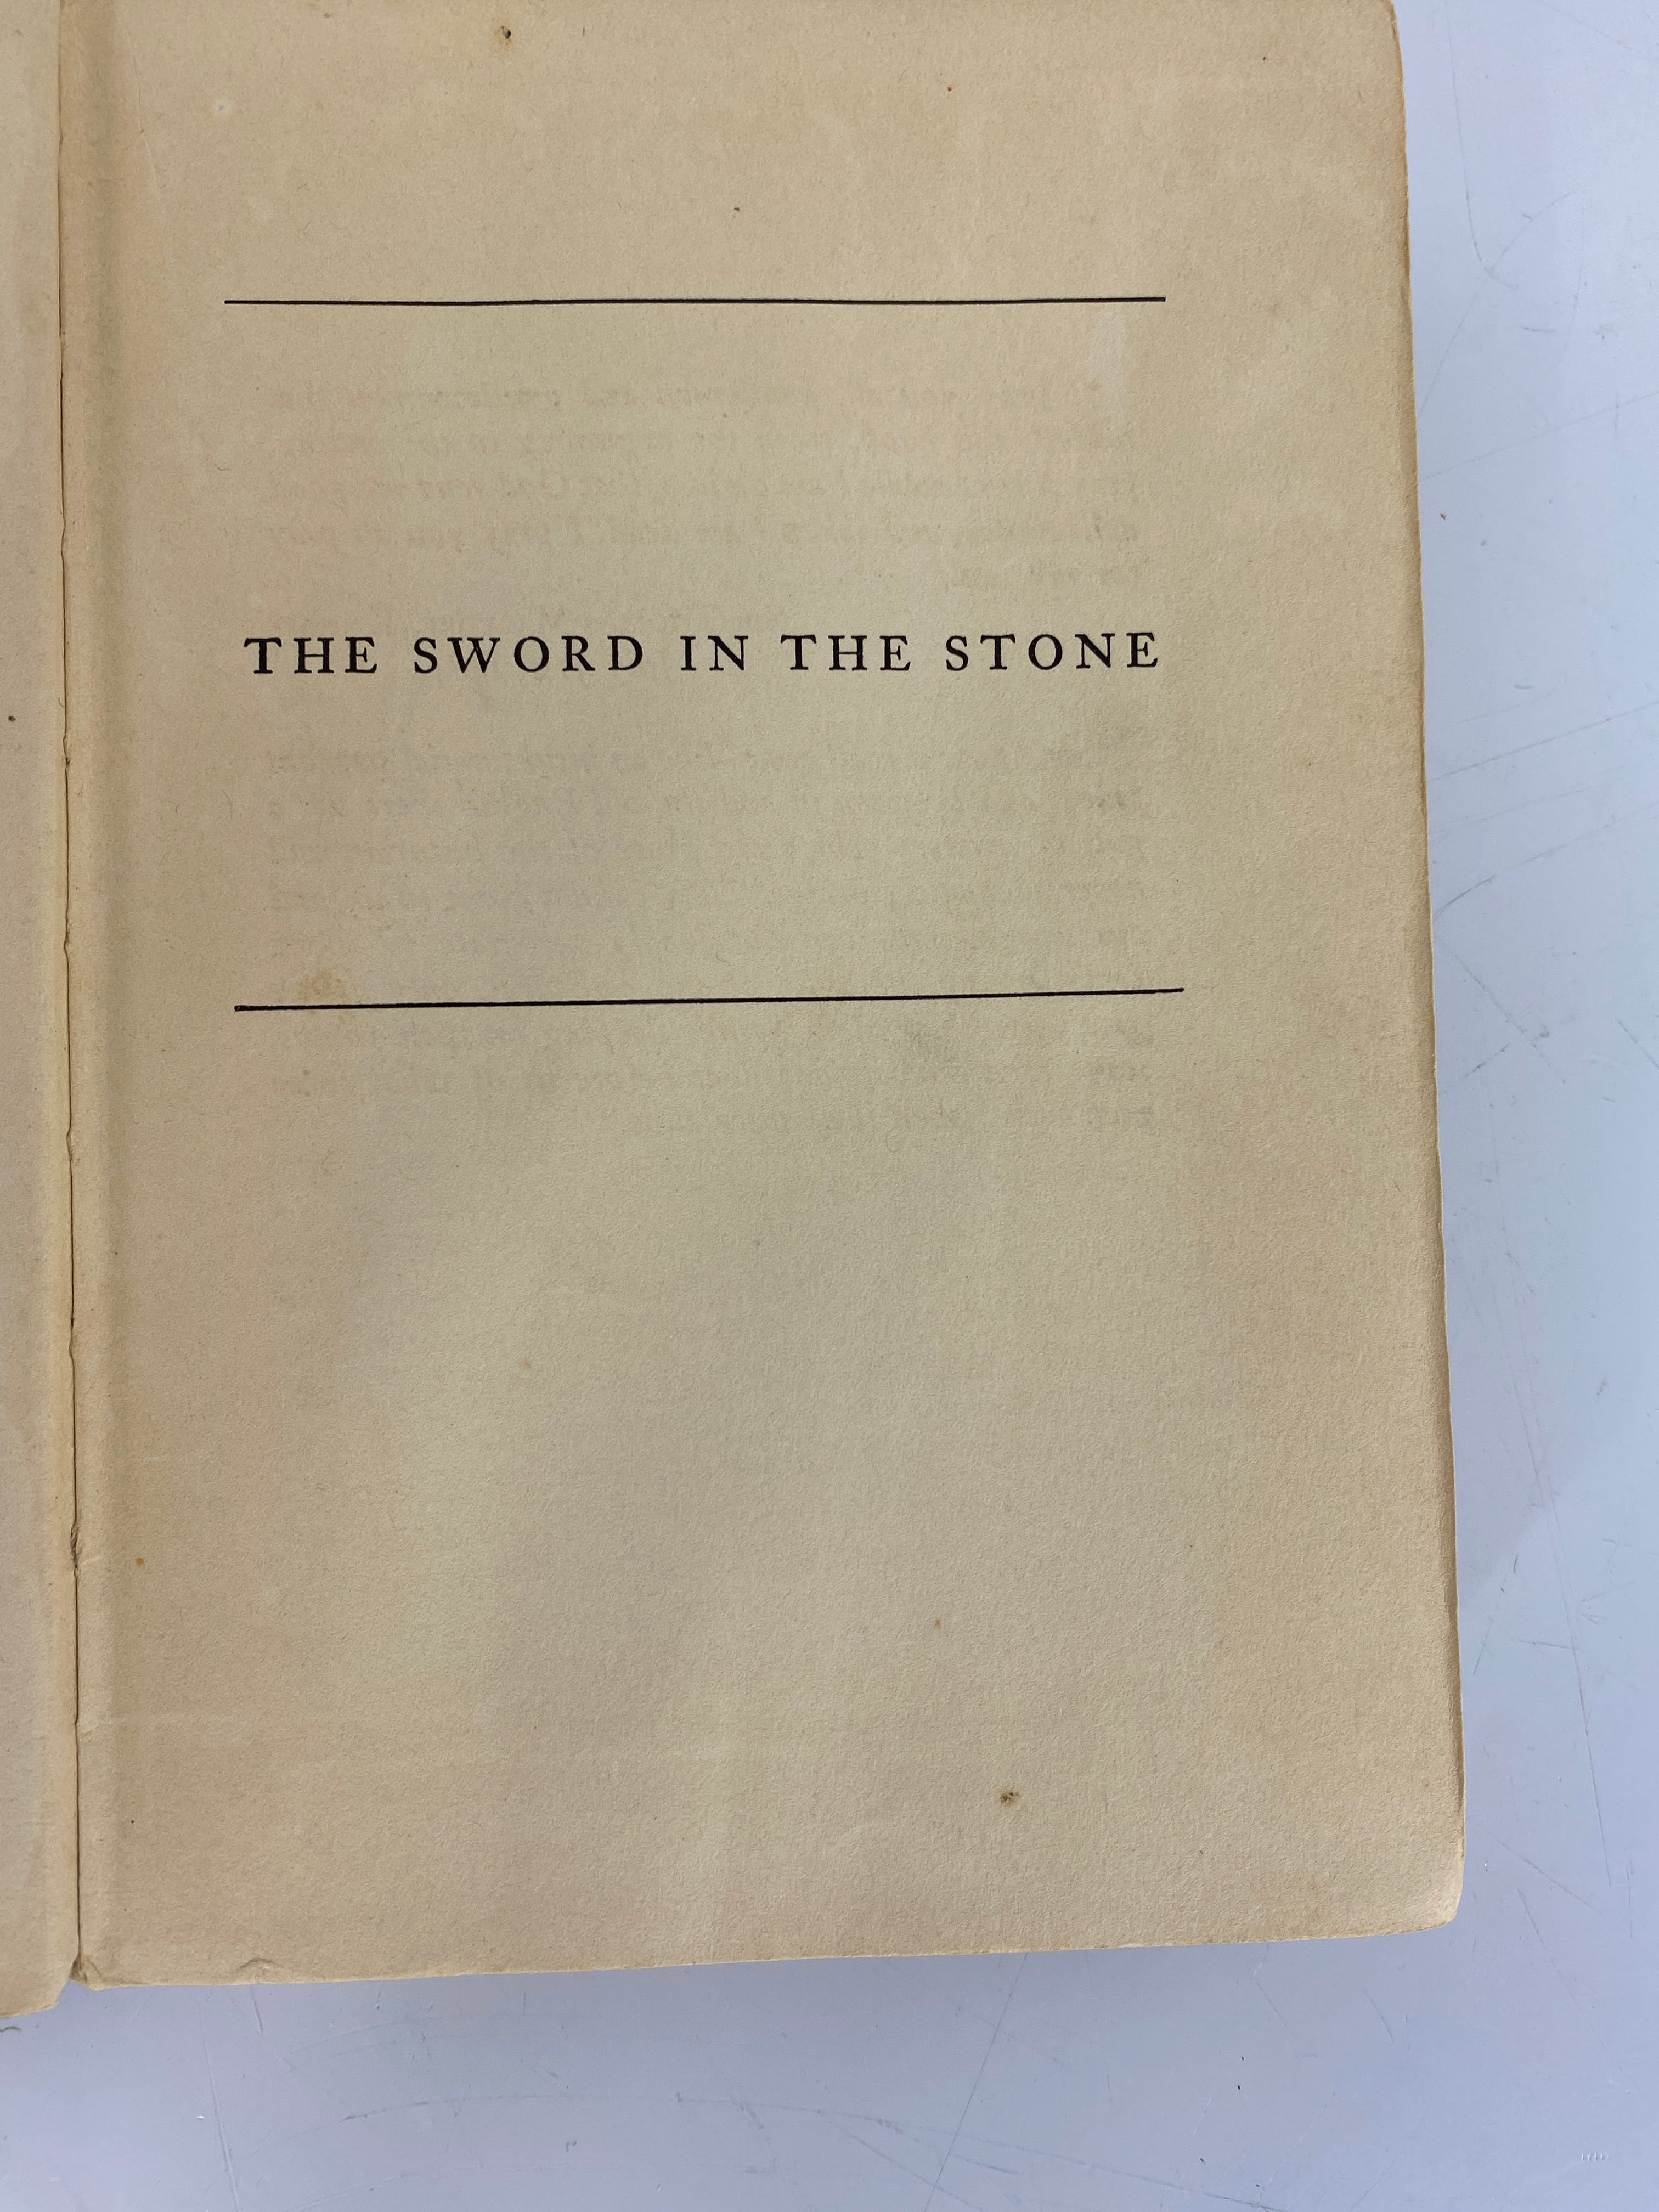 The Sword in the Stone by T.H. White First Edition 1939 G.P. Putnam's Sons HC